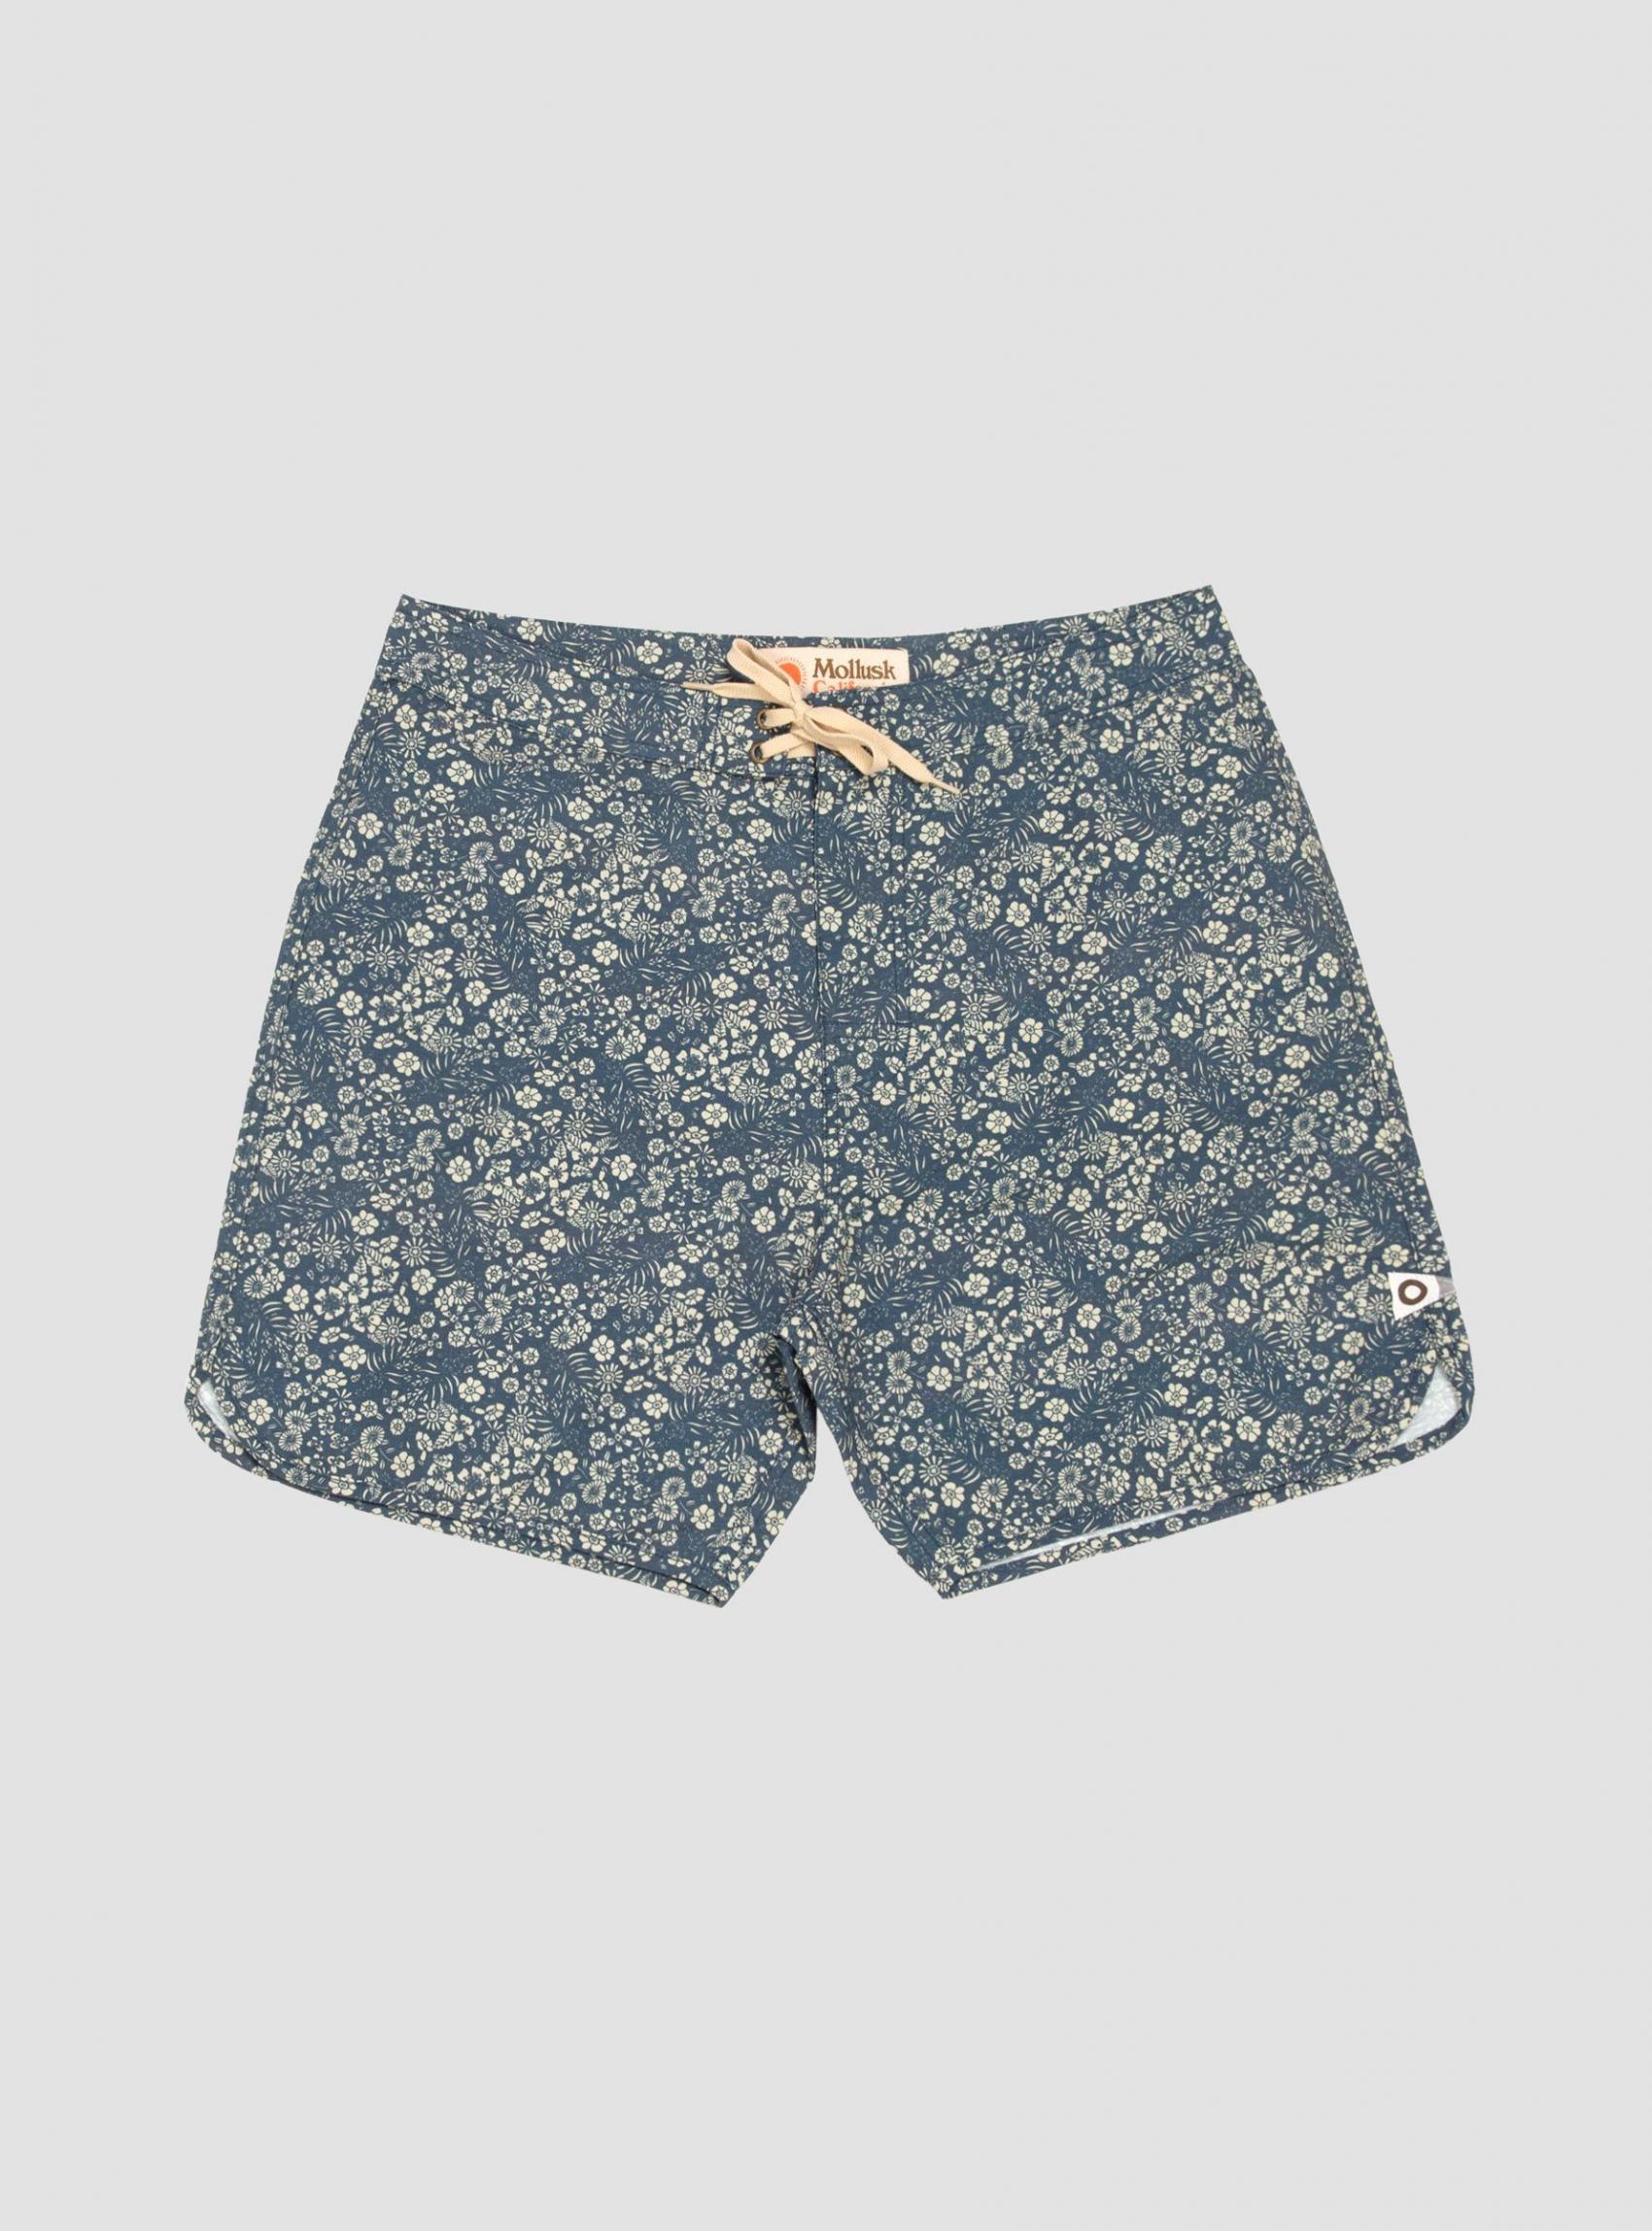 Shorts | Mollusk Mens Scallop Swimming Trunks Blue Meadow Blue